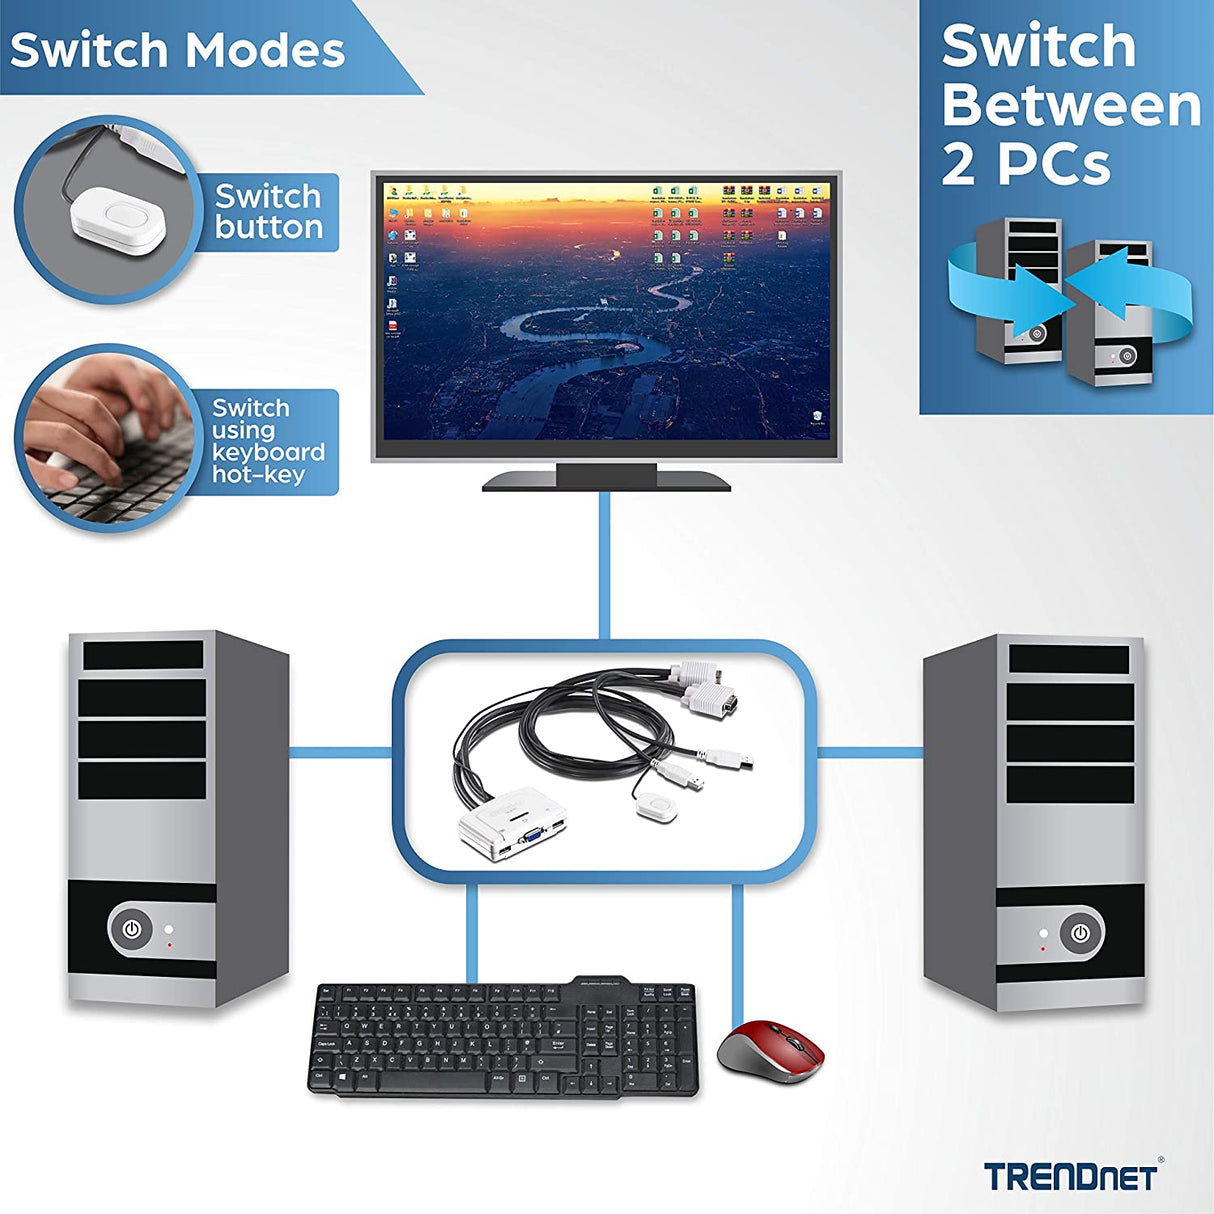 TRENDnet 2-Port USB KVM Switch and Cable Kit, Manage Two PC's, USB 2.0, Auto-Scan, Hot-Keys, Windows/Linux/Mac 10.4 or Higher, TK-217i